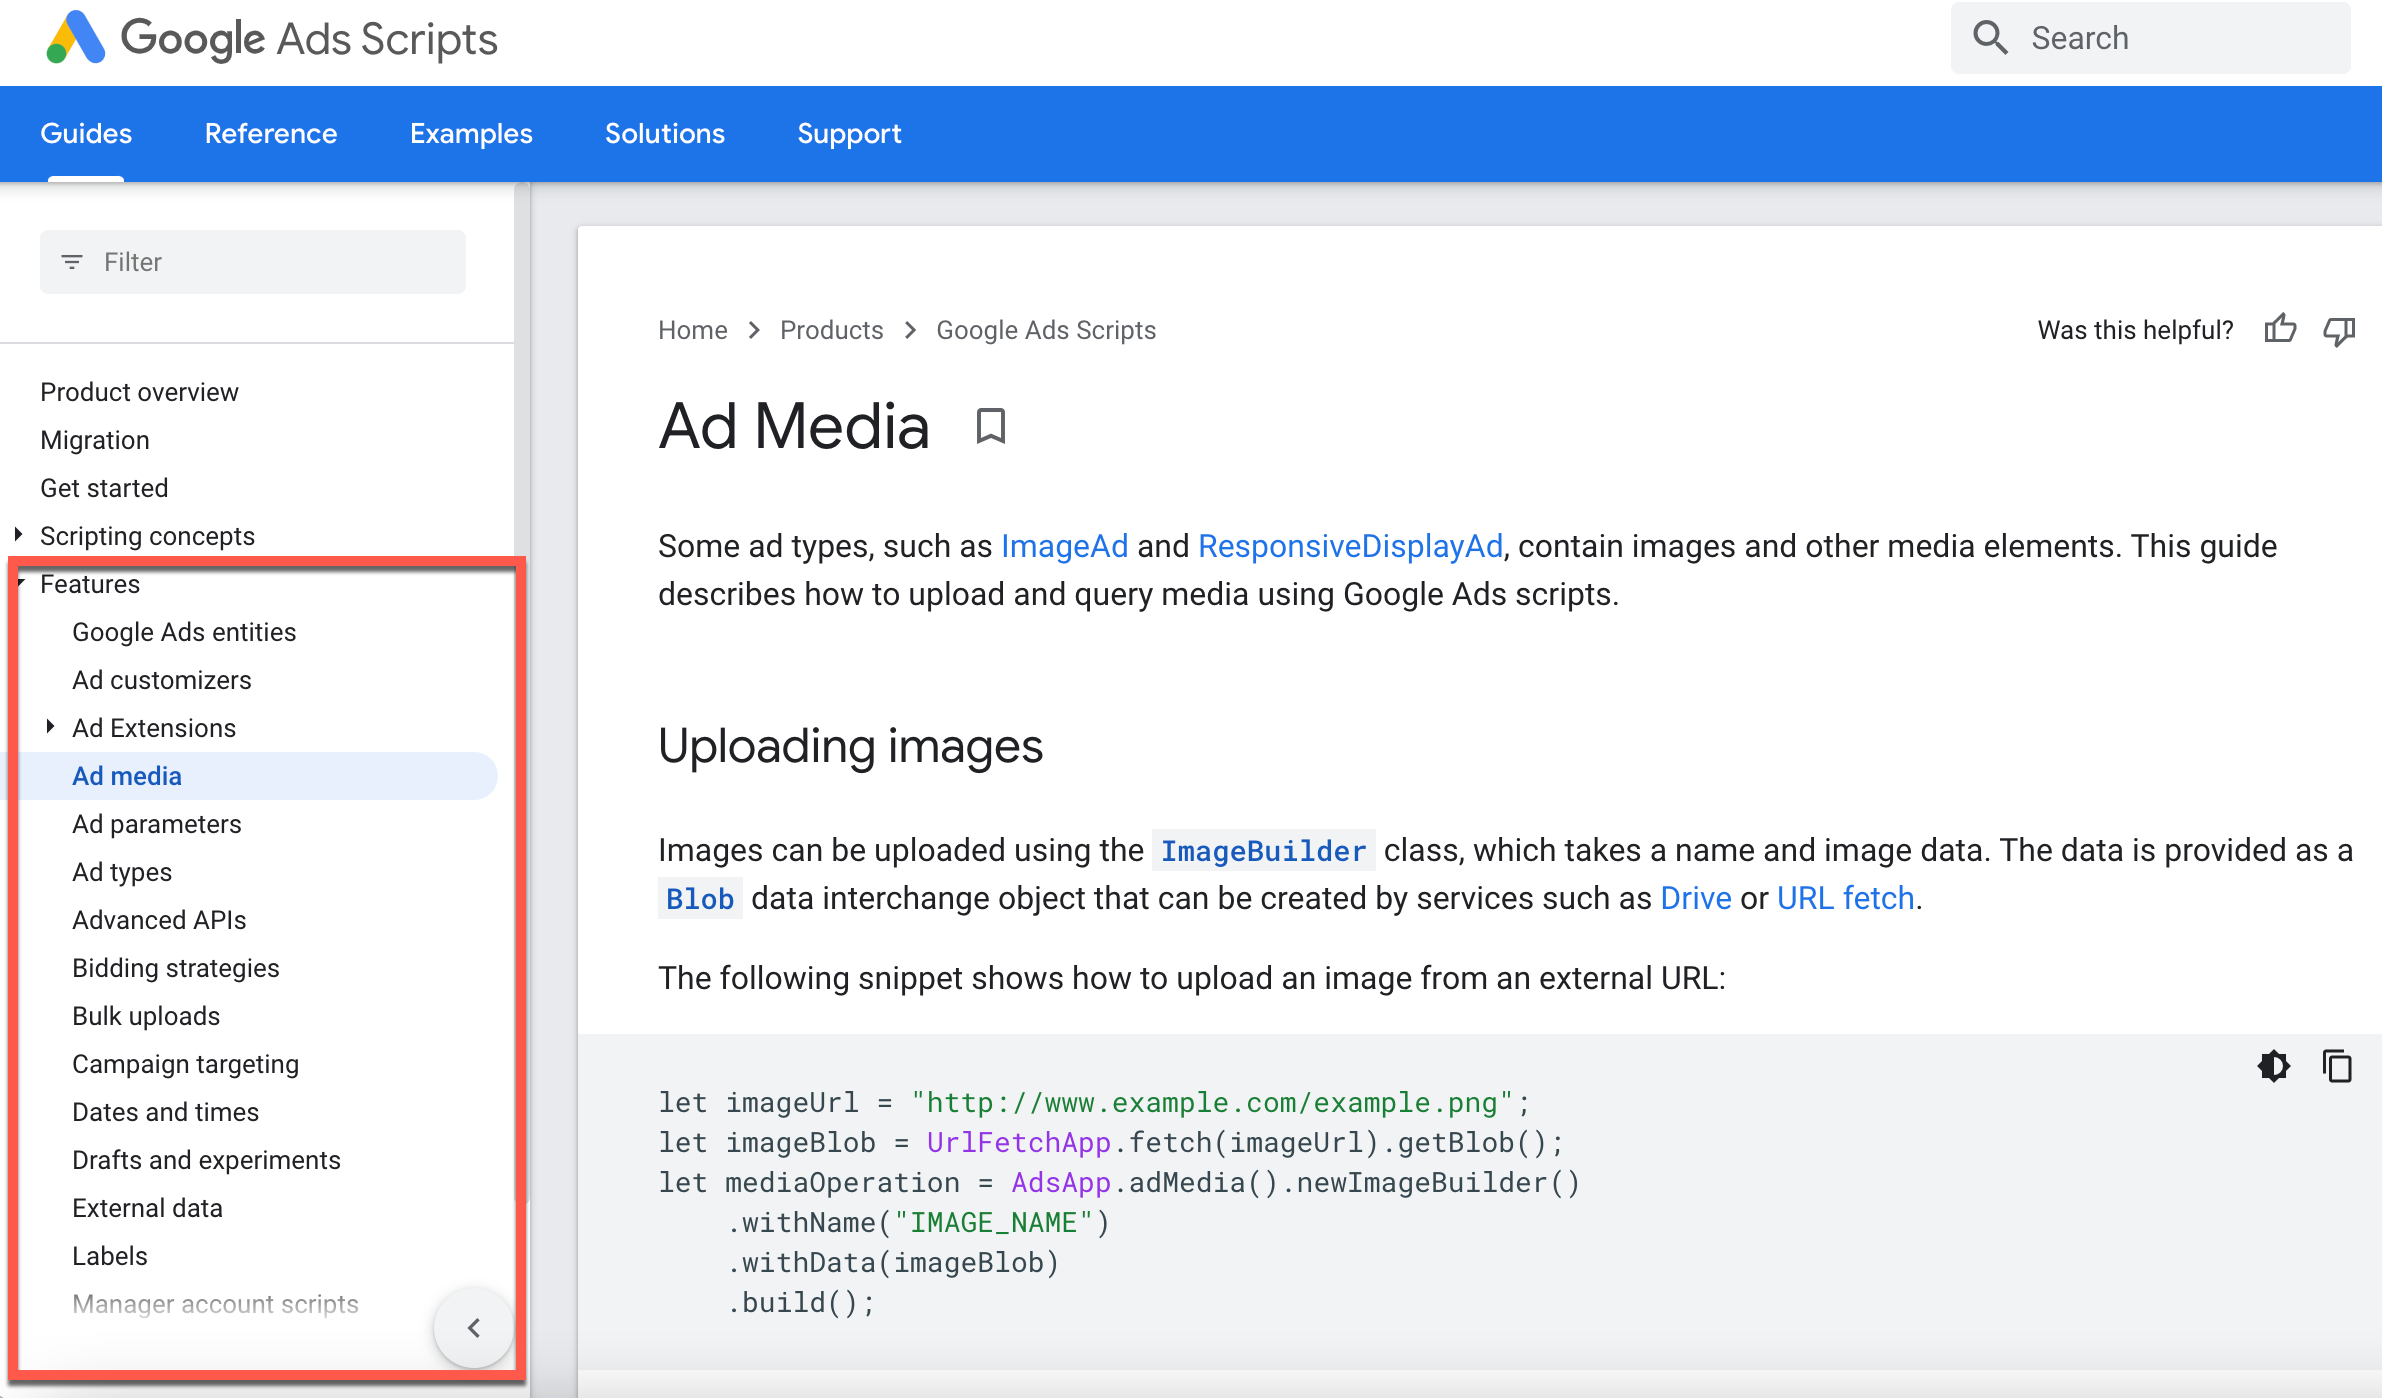 Features on the Google Ads Scripts page